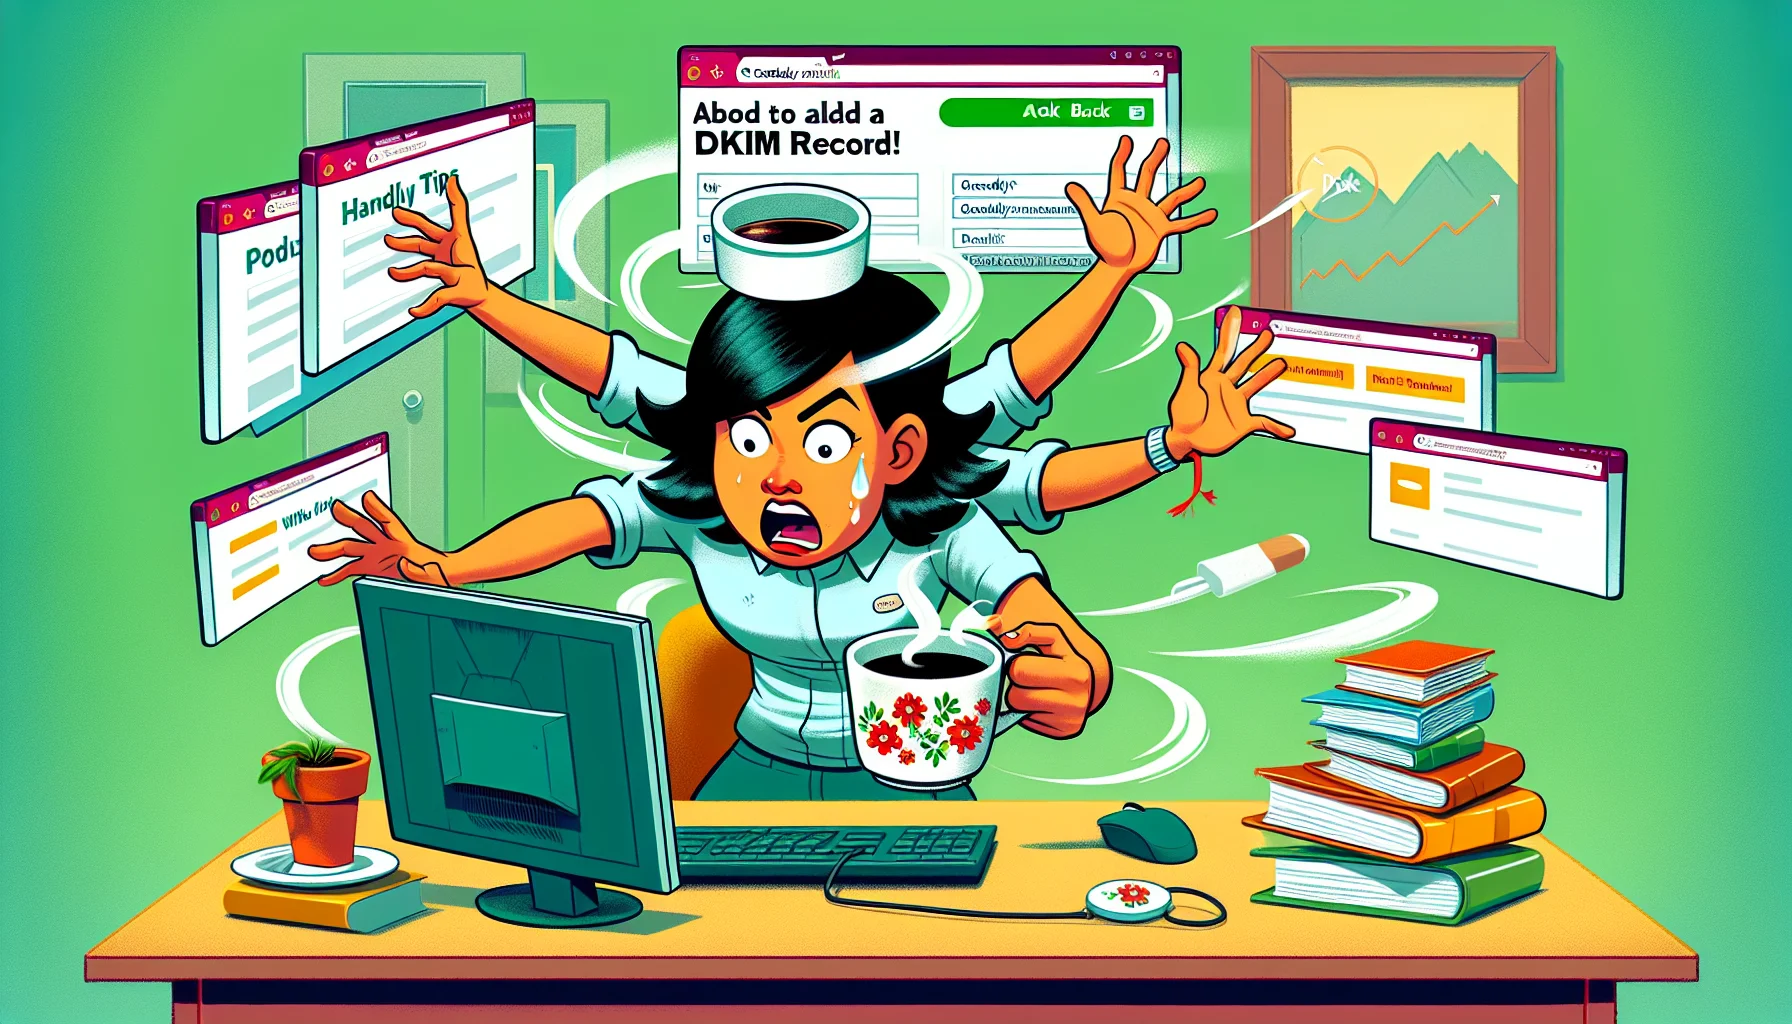 Depict a humorous scene set in a colorful office environment, with a visibly flustered Asian woman website administrator having multiple browser tabs open. She should be seen about to add a DKIM record via the GoDaddy web hosting interface on her computer screen, with 'handy tips and tutorials' pop-ups floating around her. A digital 'Back' button is playfully dancing out of her reach, while she also balances a cup of chai in her other hand, emphasizing the multitasking and chaotic nature of web management.